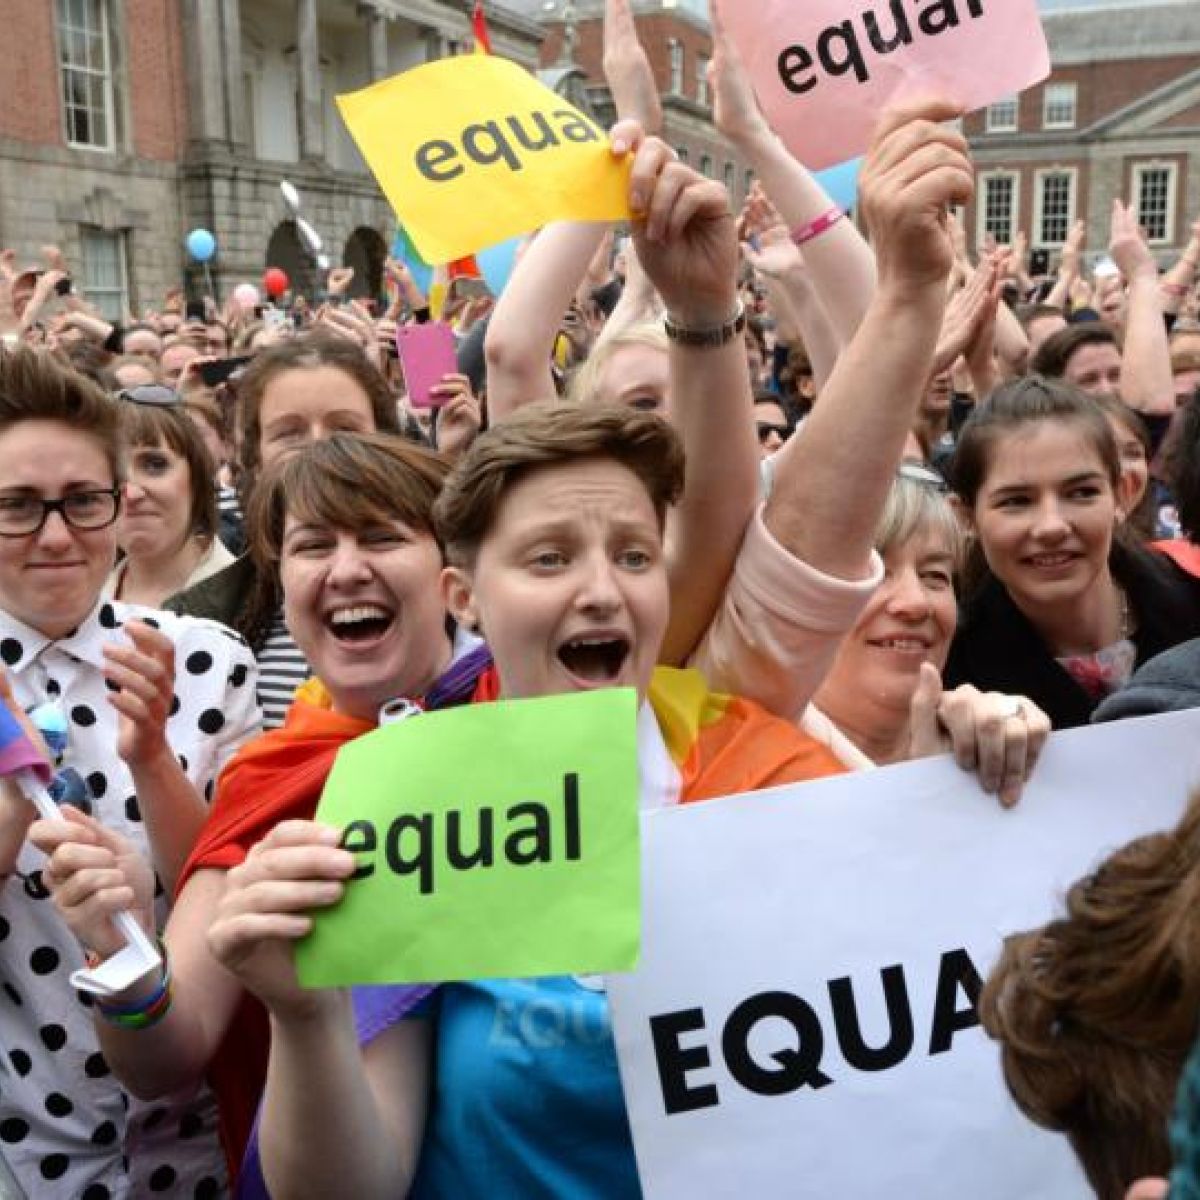 WATCH: Young people in Laois share video about local LGBT 